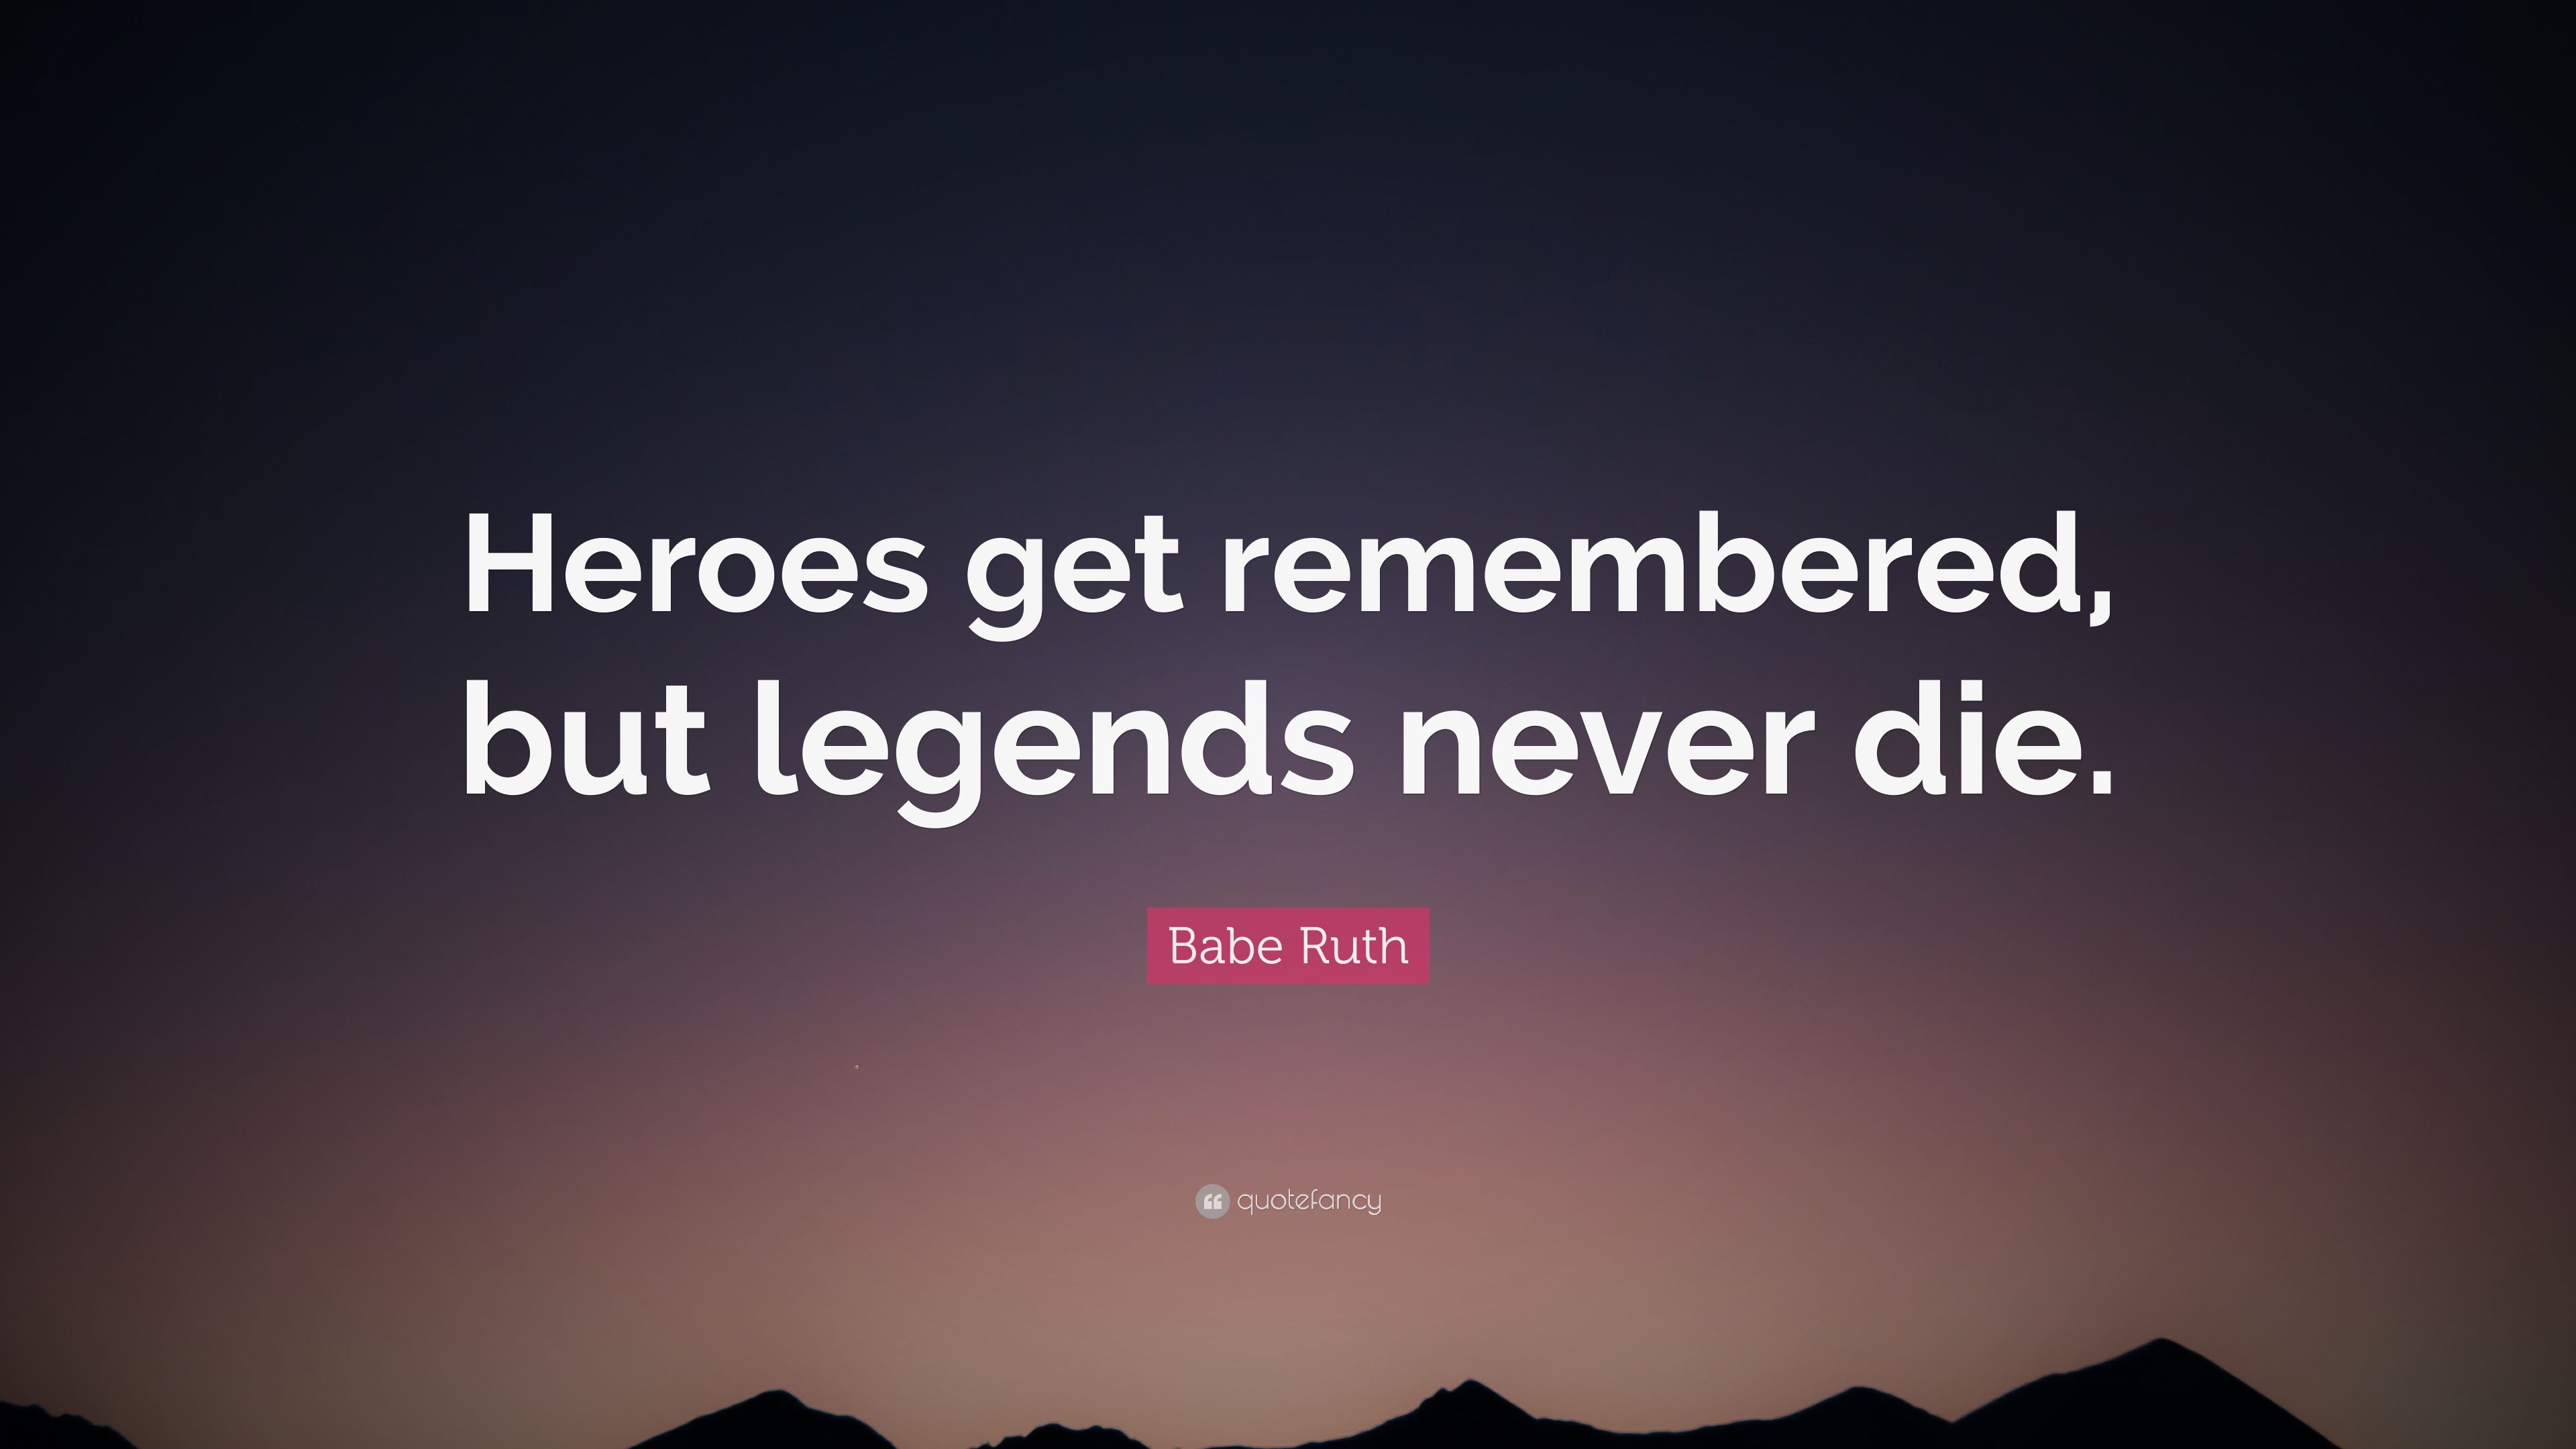 Babe Ruth Quote: “Heroes get remembered, but legends never die